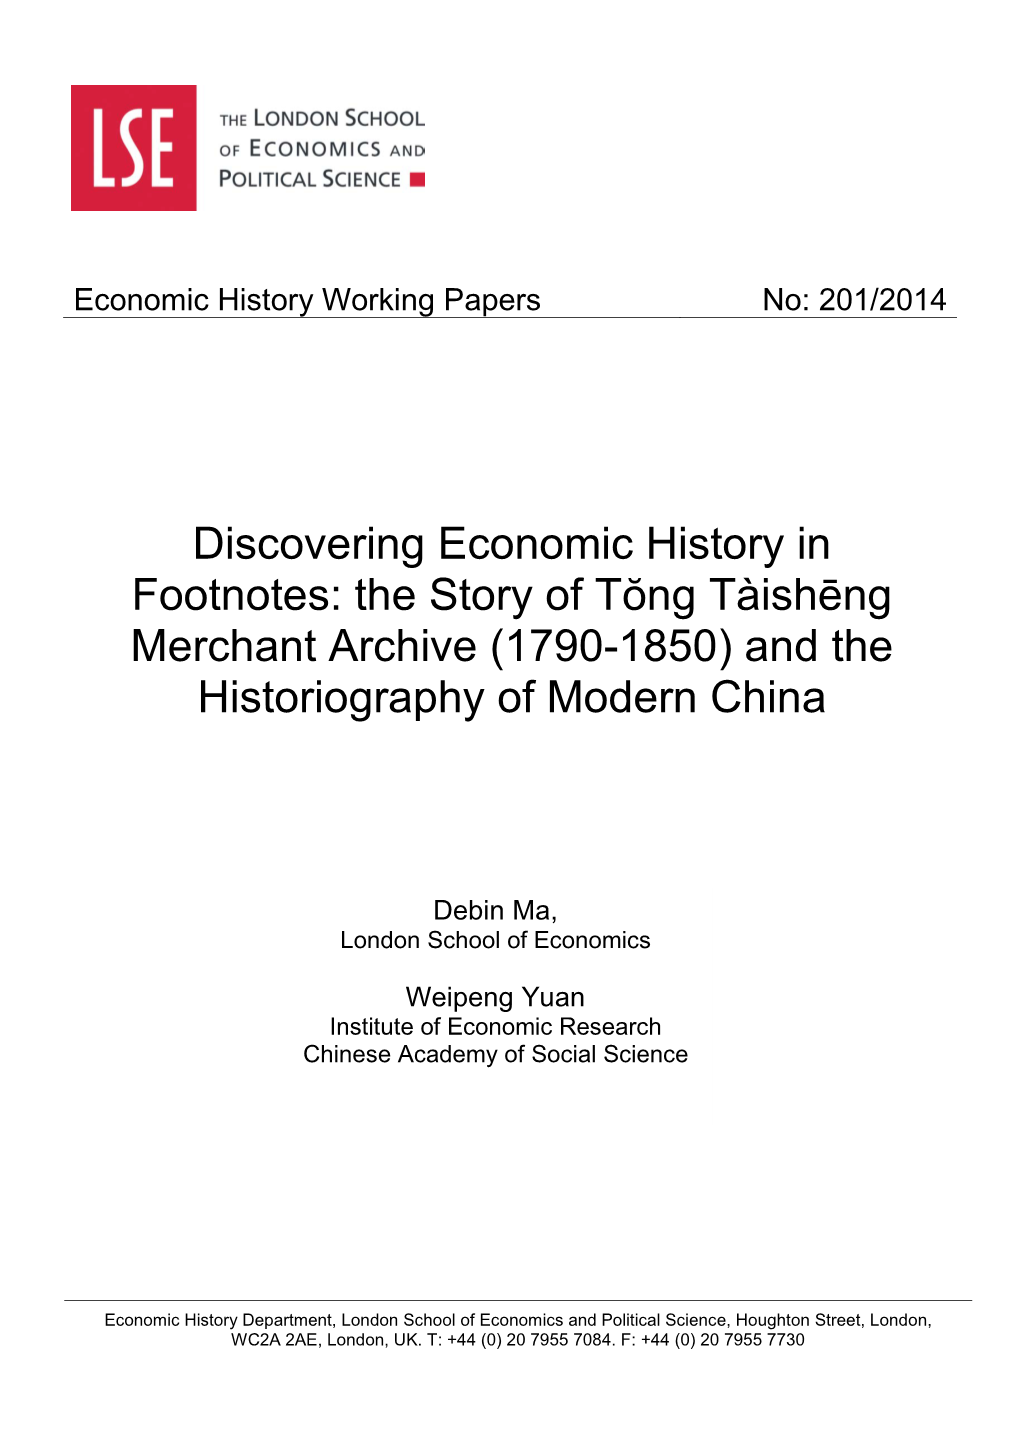 Discovering Economic History in Footnotes: the Story of Tŏng Tàishēng Merchant Archive (1790-1850) and the Historiography of Modern China